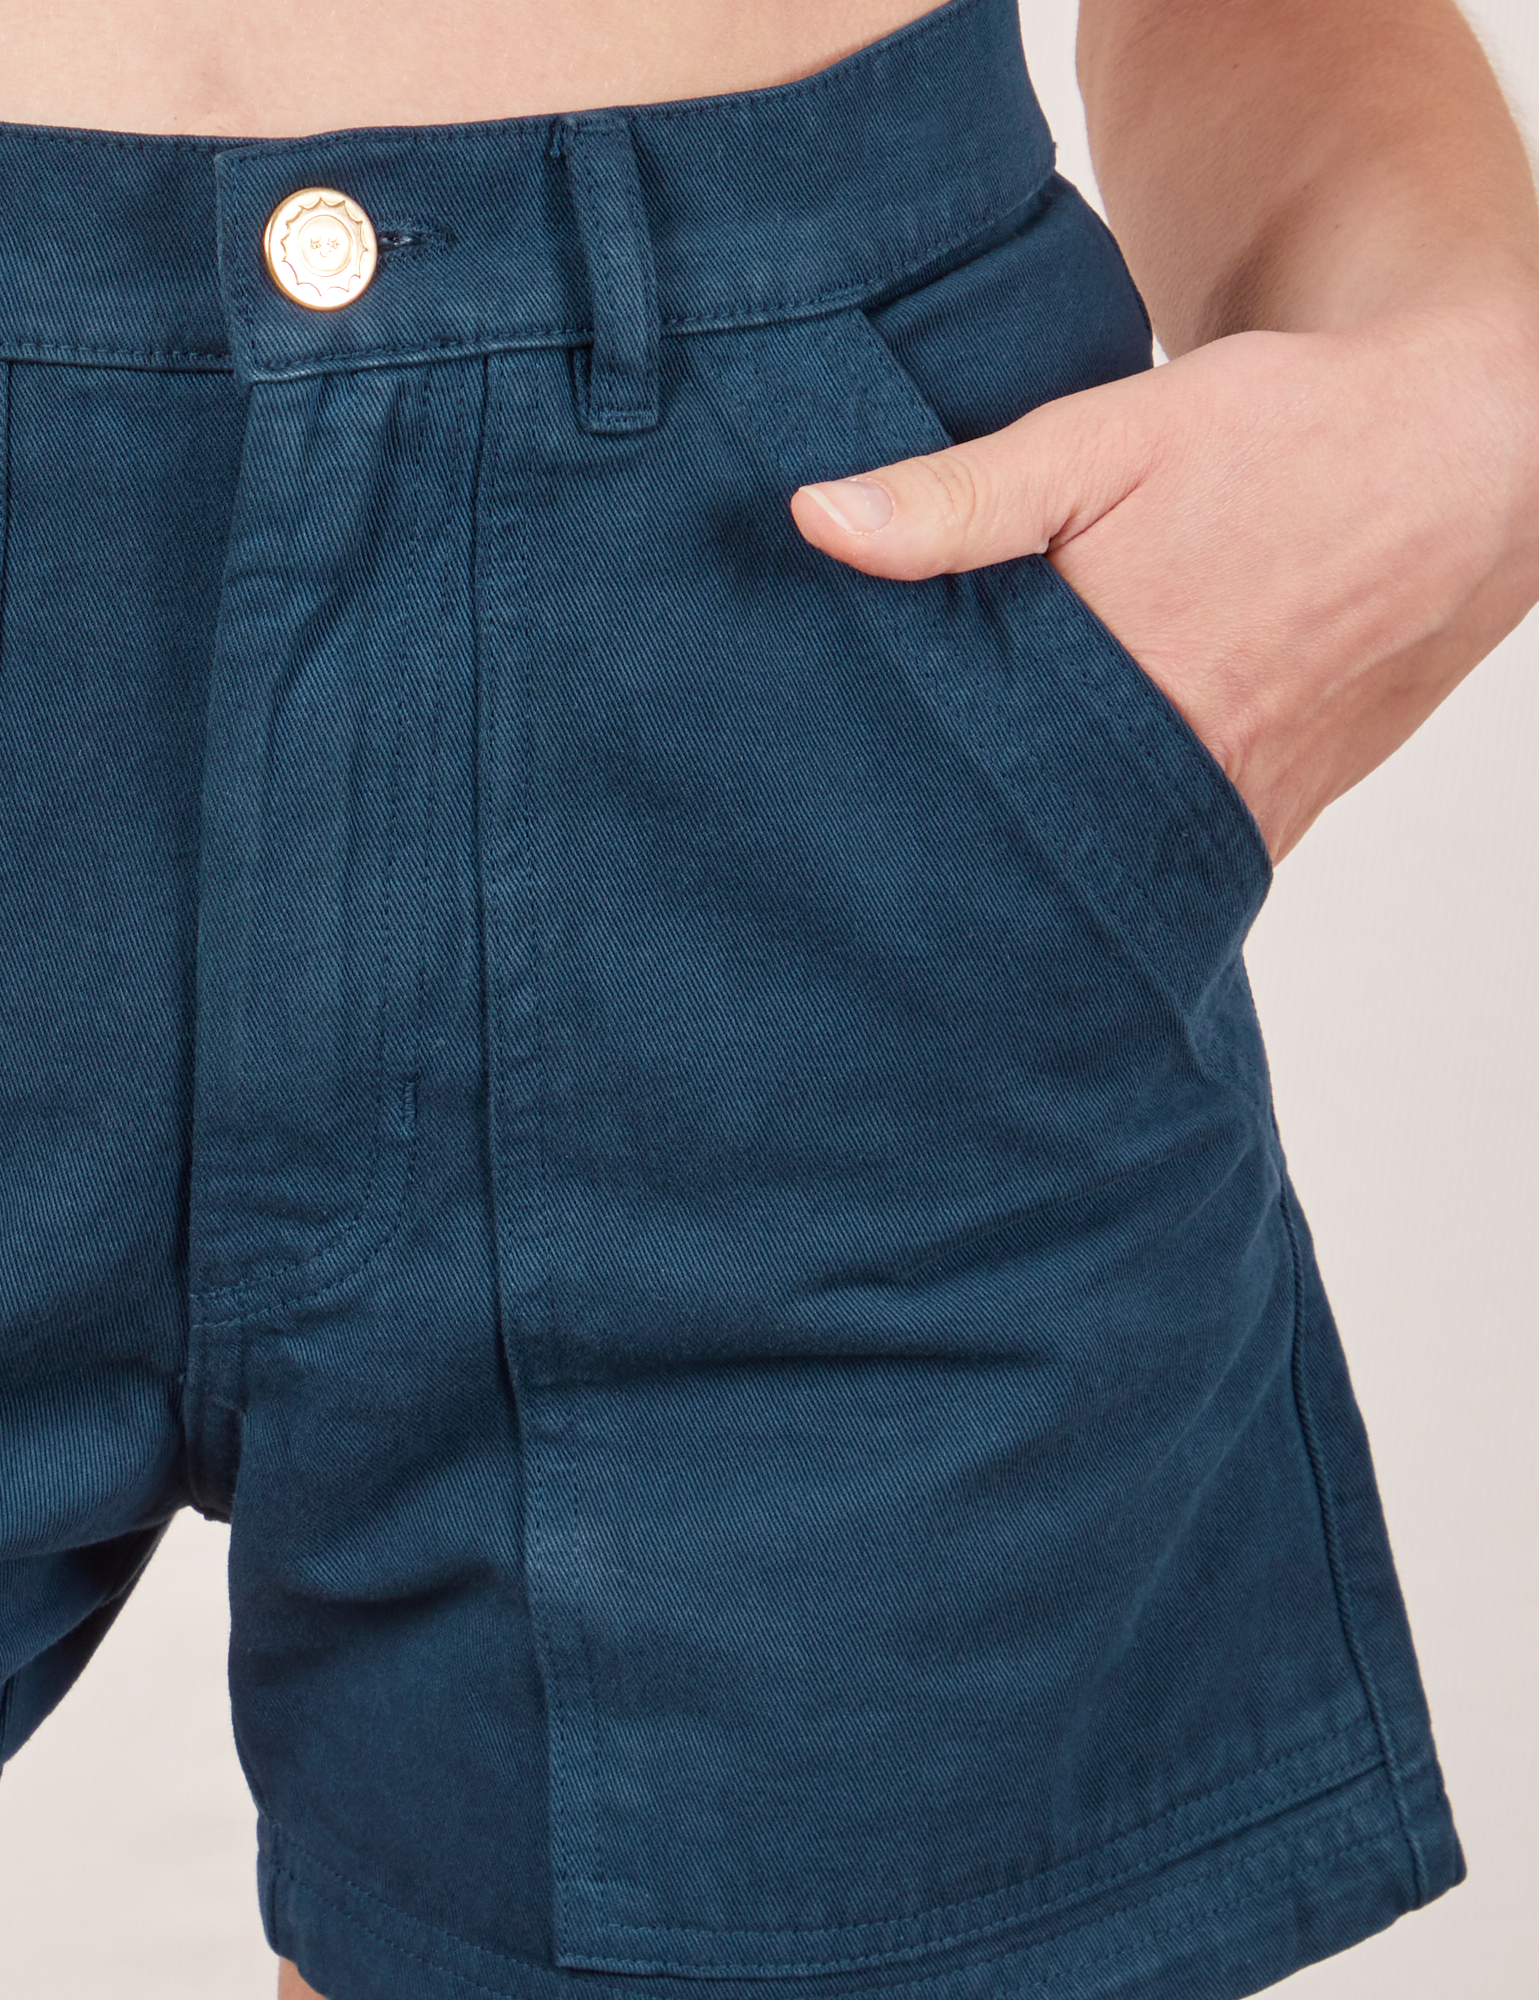 Classic Work Shorts in Lagoon front pocket close up. Madeline has her hand in the pocket.